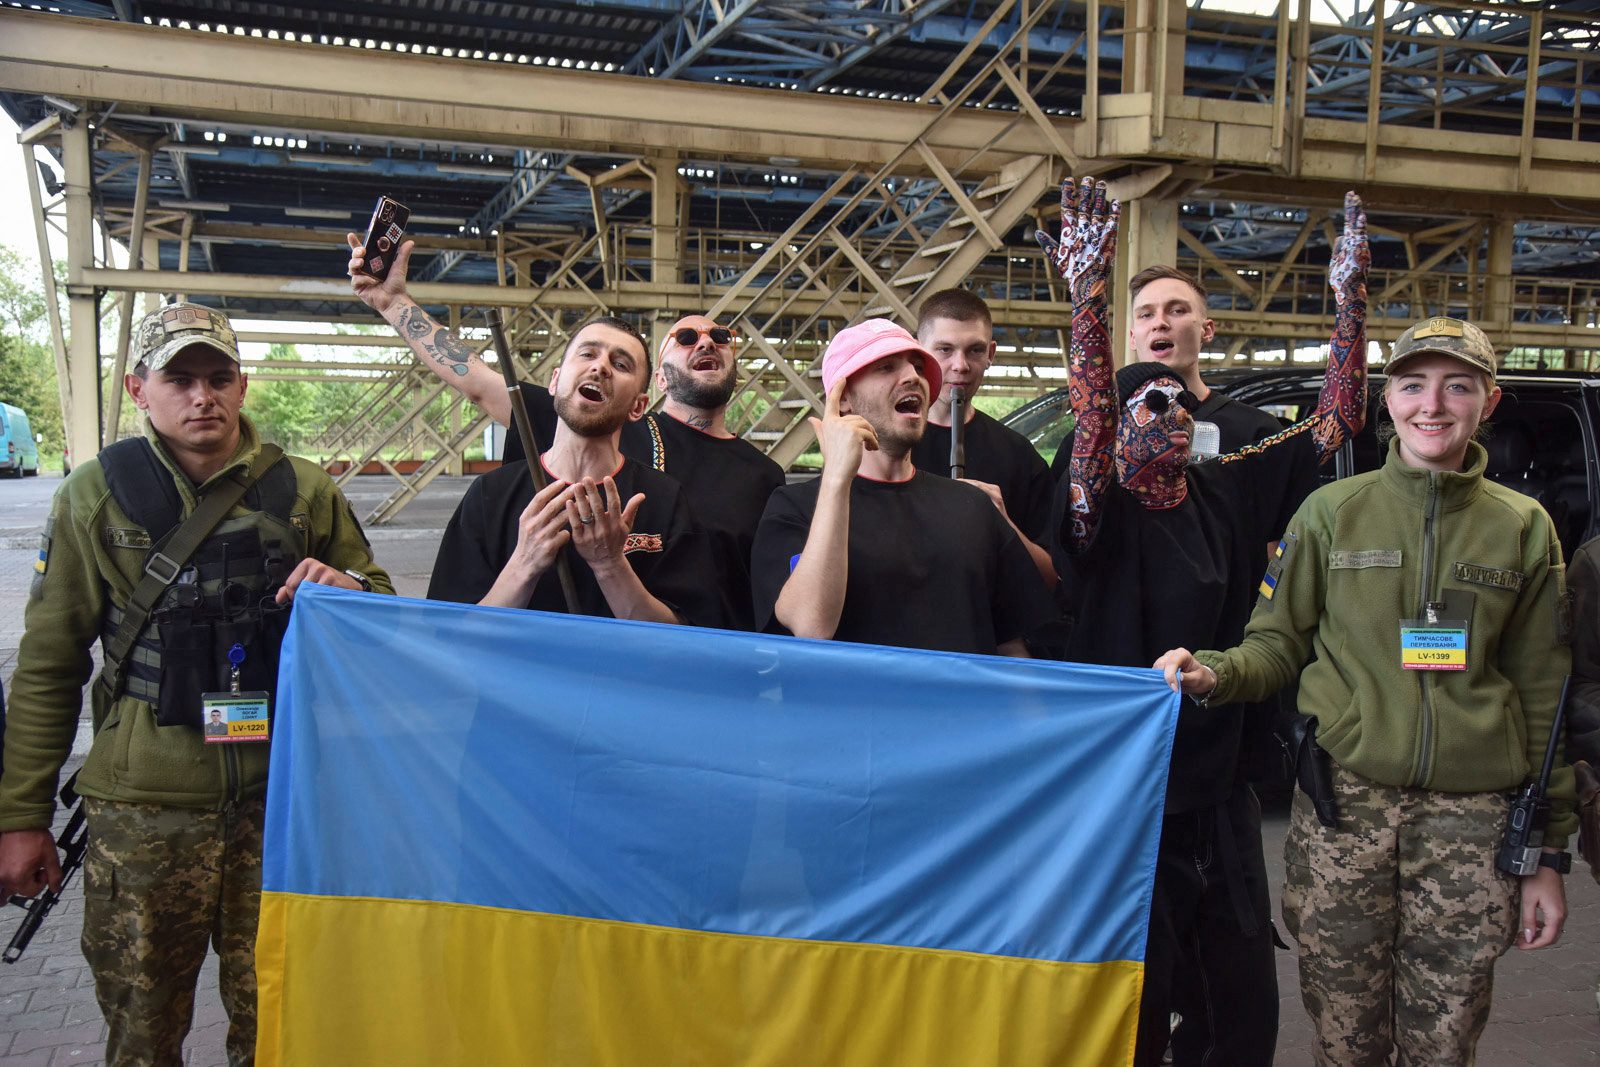 Kalush Orchestra, the winners of the 2022 Eurovision Song Contest, are welcomed by members of Ukraine's State Border Guard Service as they arrive at the Ukraine-Poland border crossing point near the village of Krakovets, in Lviv region, Ukraine May 16, 2022.  REUTERS/Pavlo Palamarchuk